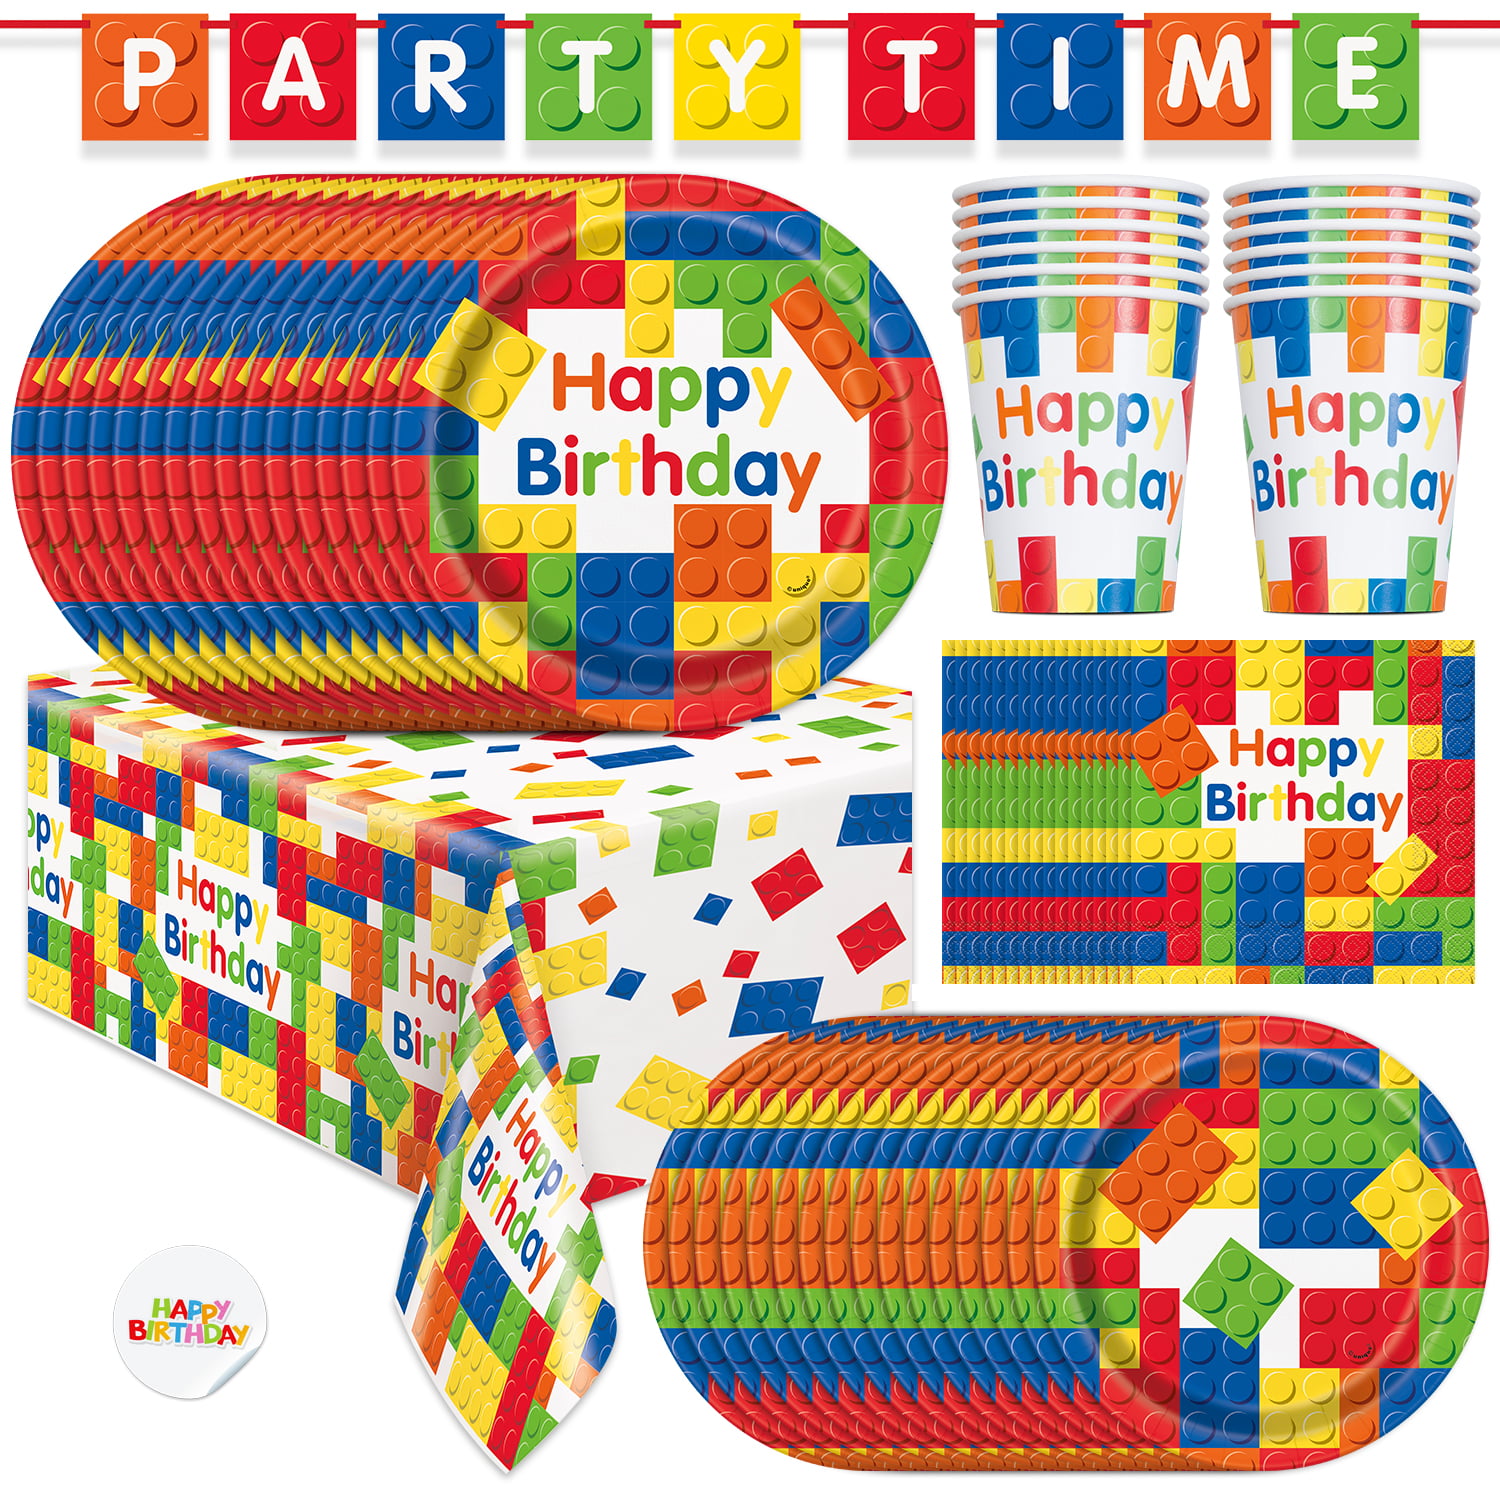 Billy ribben Ejendomsret Building Block Party Supplies | Includes Paper Plates, Cups, Napkins,  Tablecloth and Banner | Tableware for Brick and Construction Themed  Birthday Parties | Boys Birthday Party Decorations Serves 16 - Walmart.com